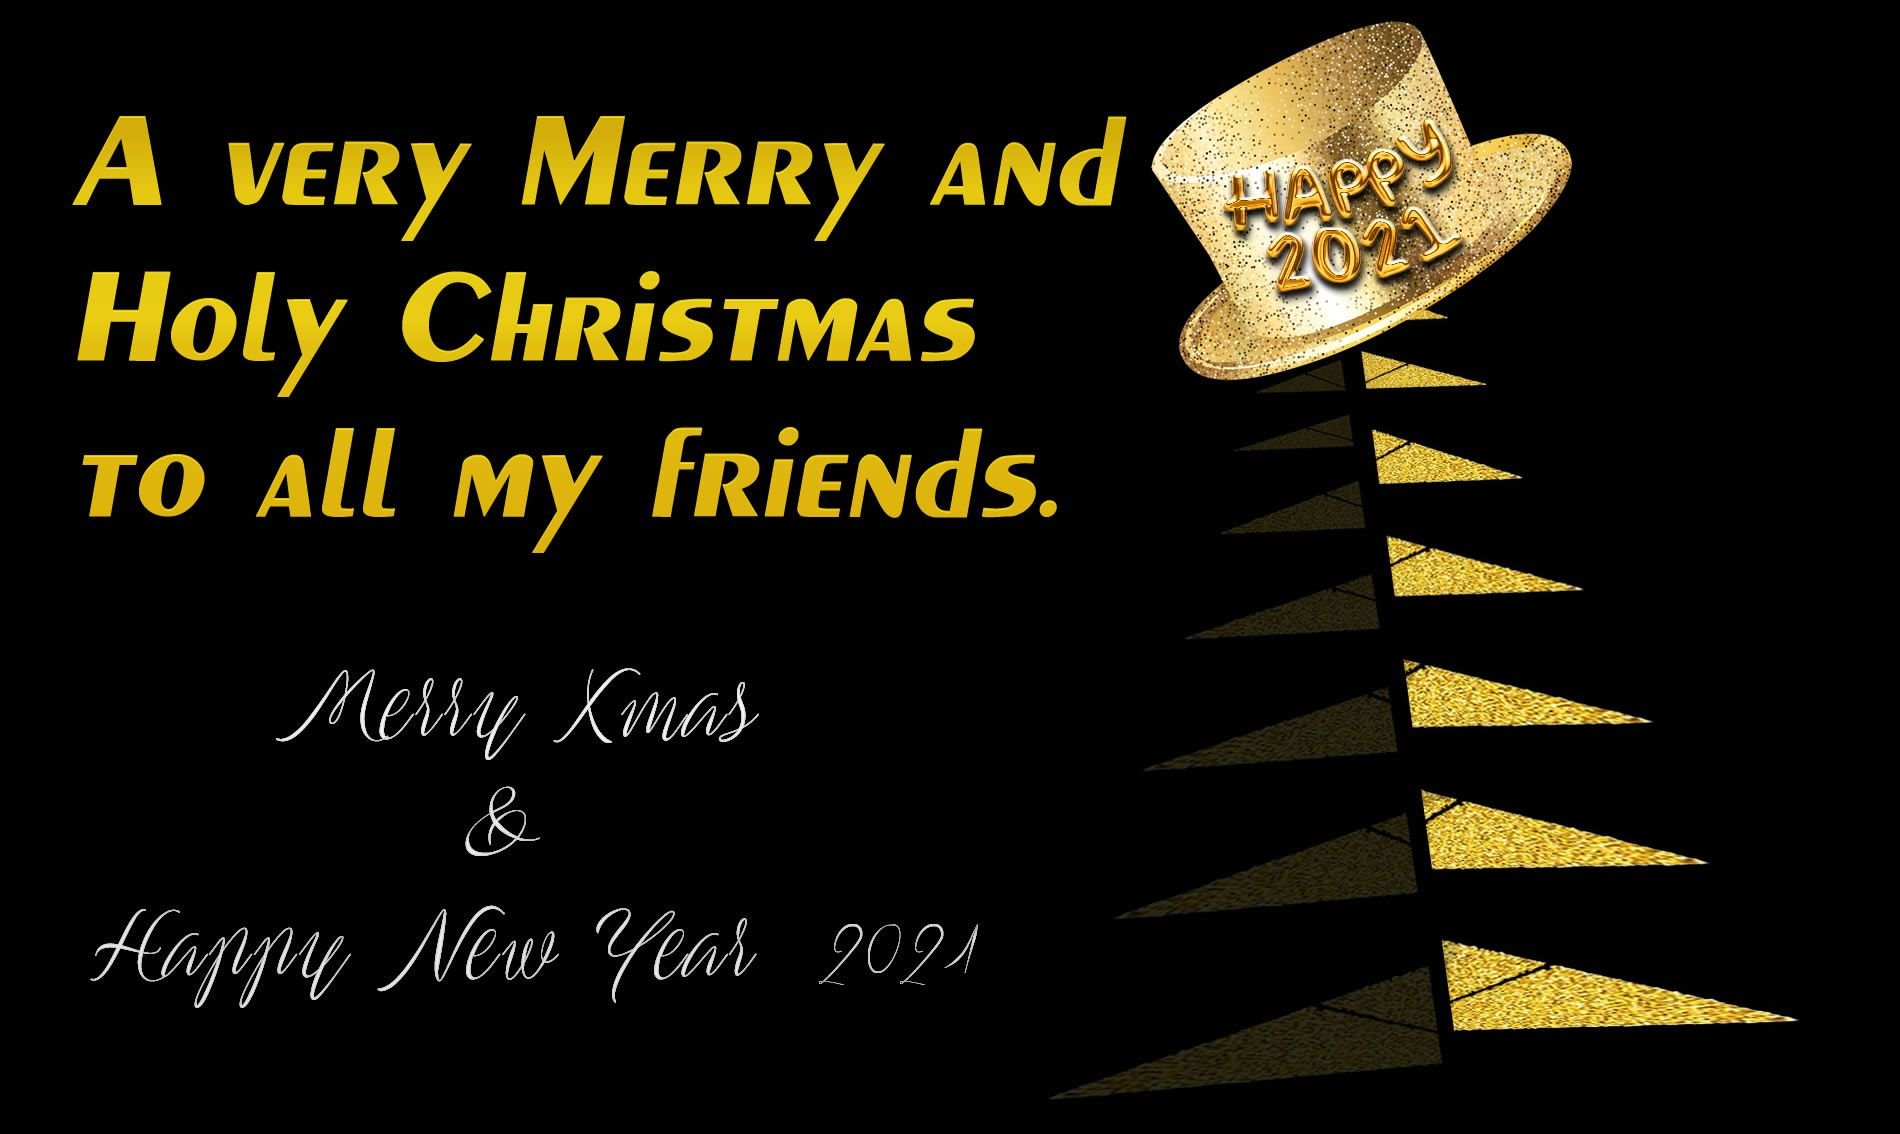 image of Merry Christmas and Happy 2021 Cards with message